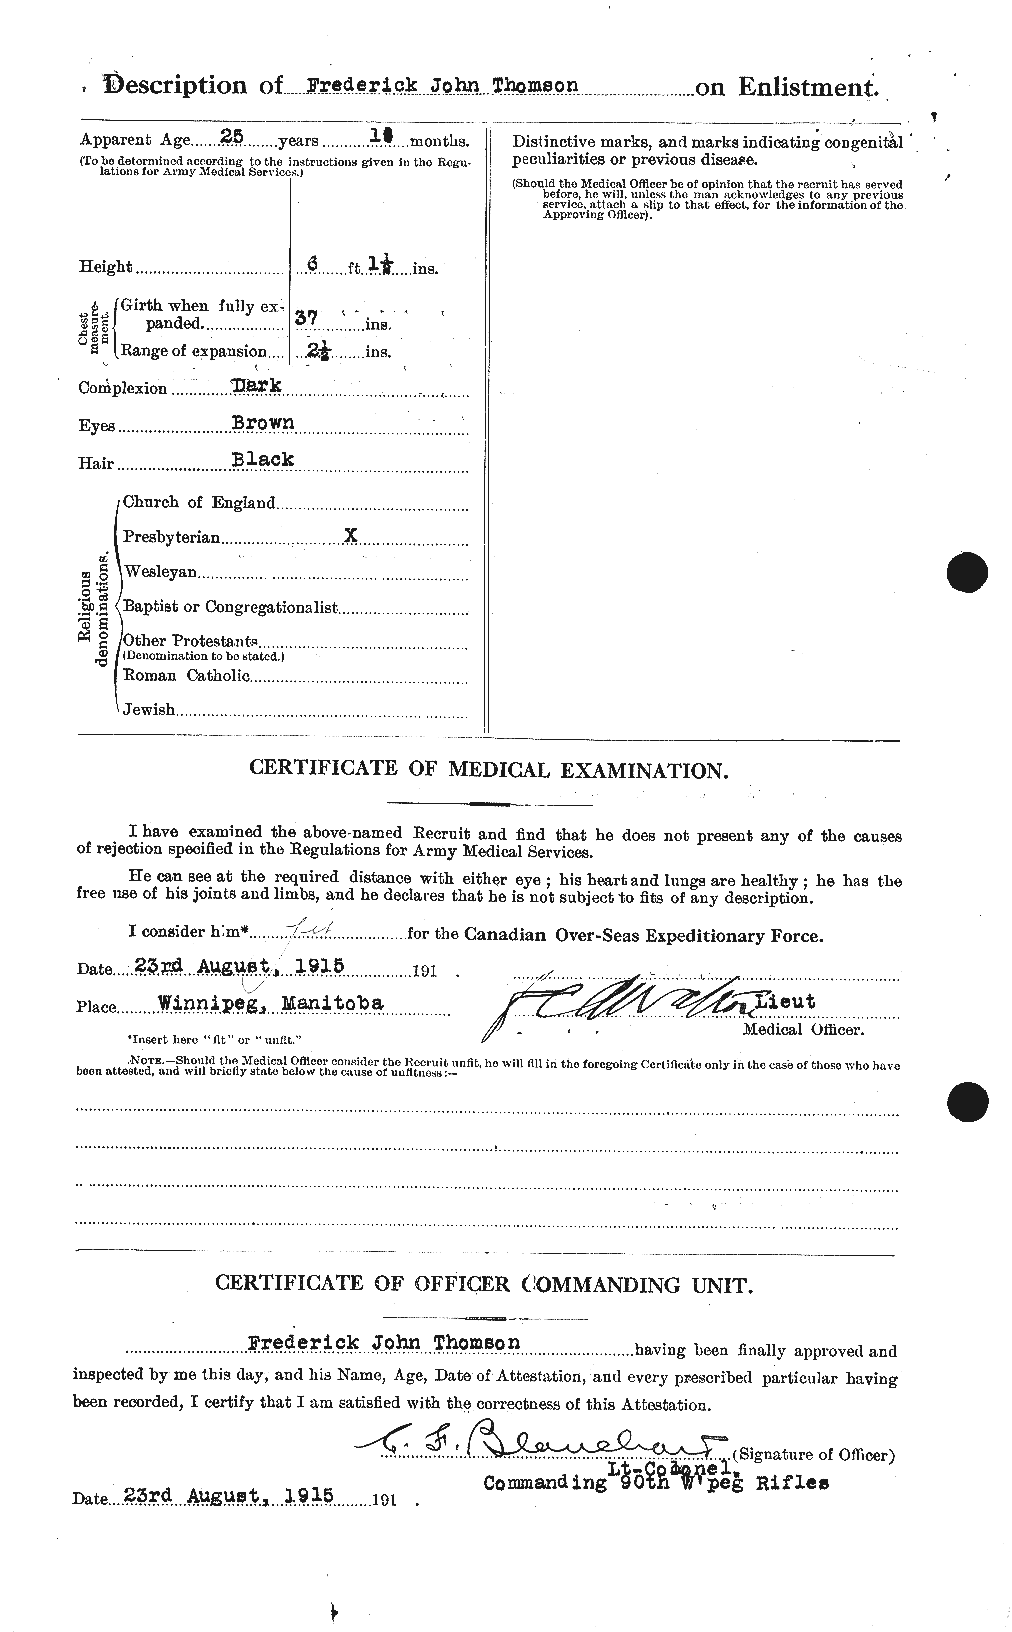 Personnel Records of the First World War - CEF 633681b